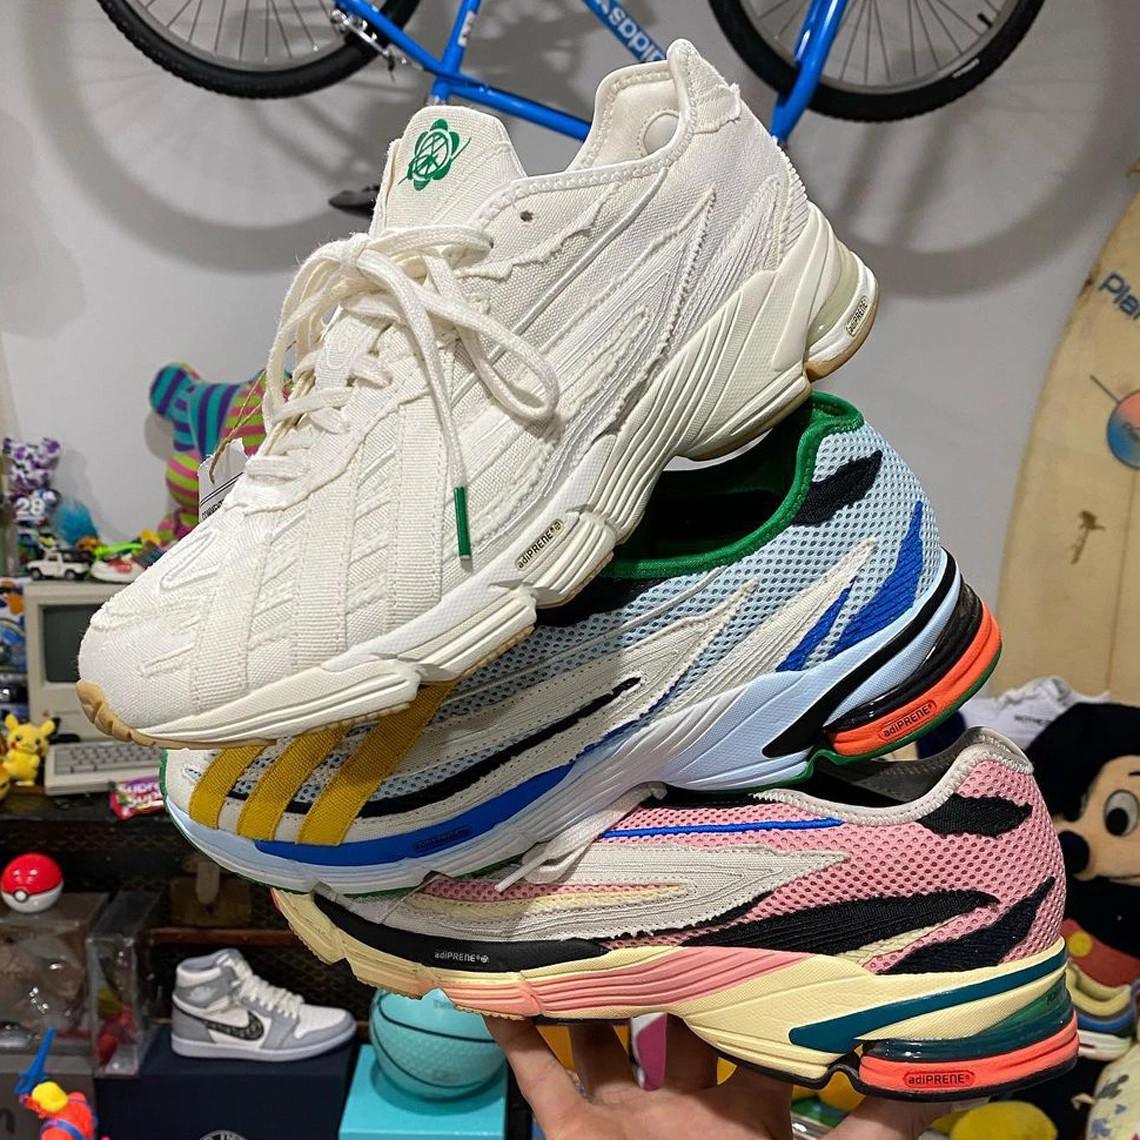 Sean Wotherspoon annonce les prochaines collaborations adidas 2023.